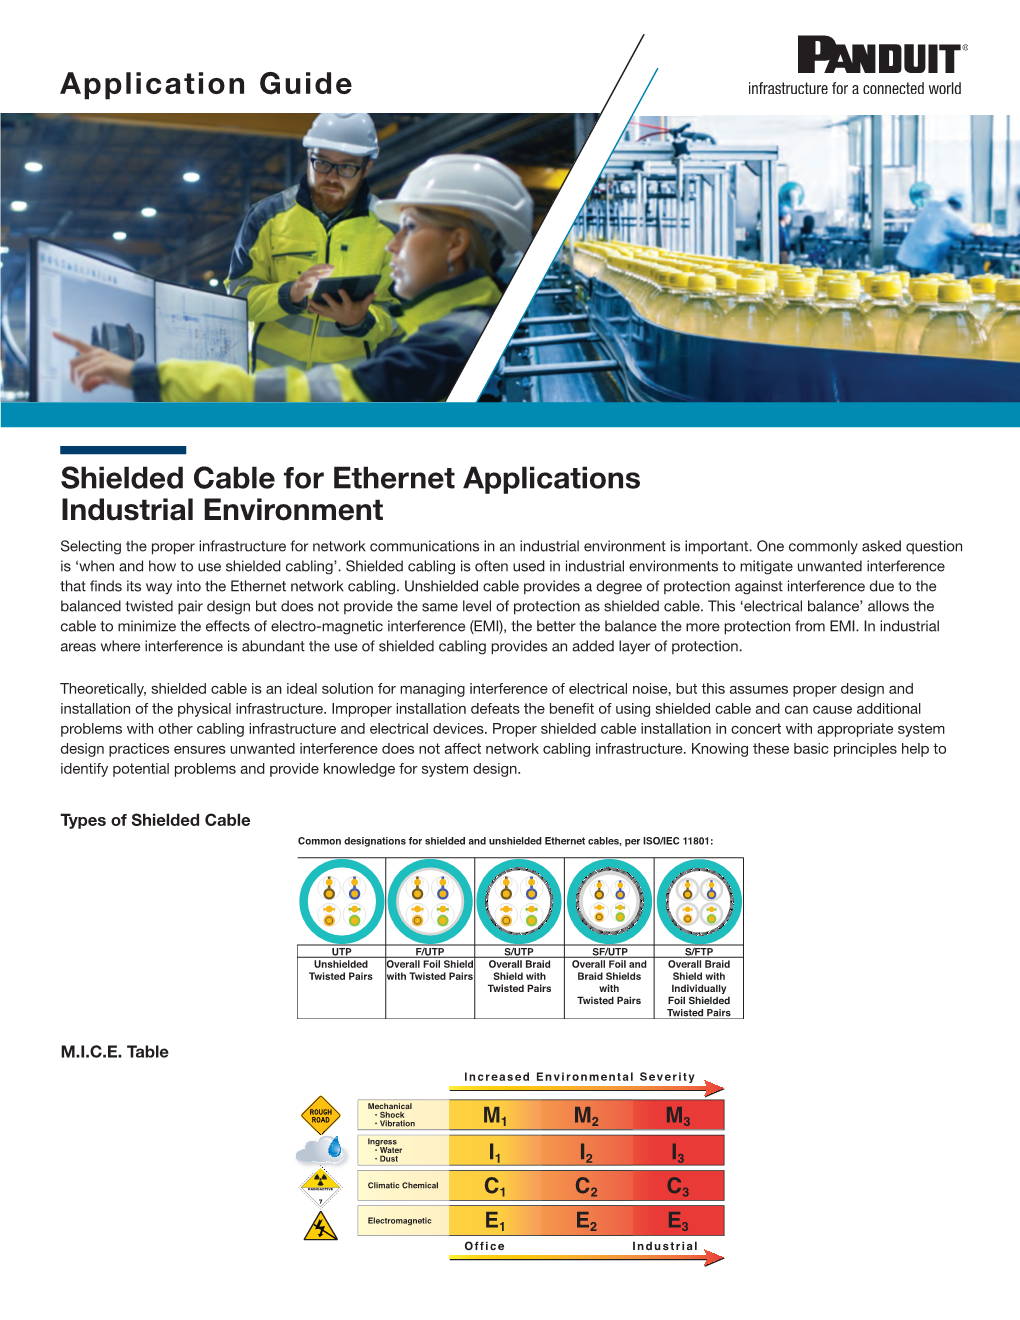 Shielded Cable for Ethernet Applications